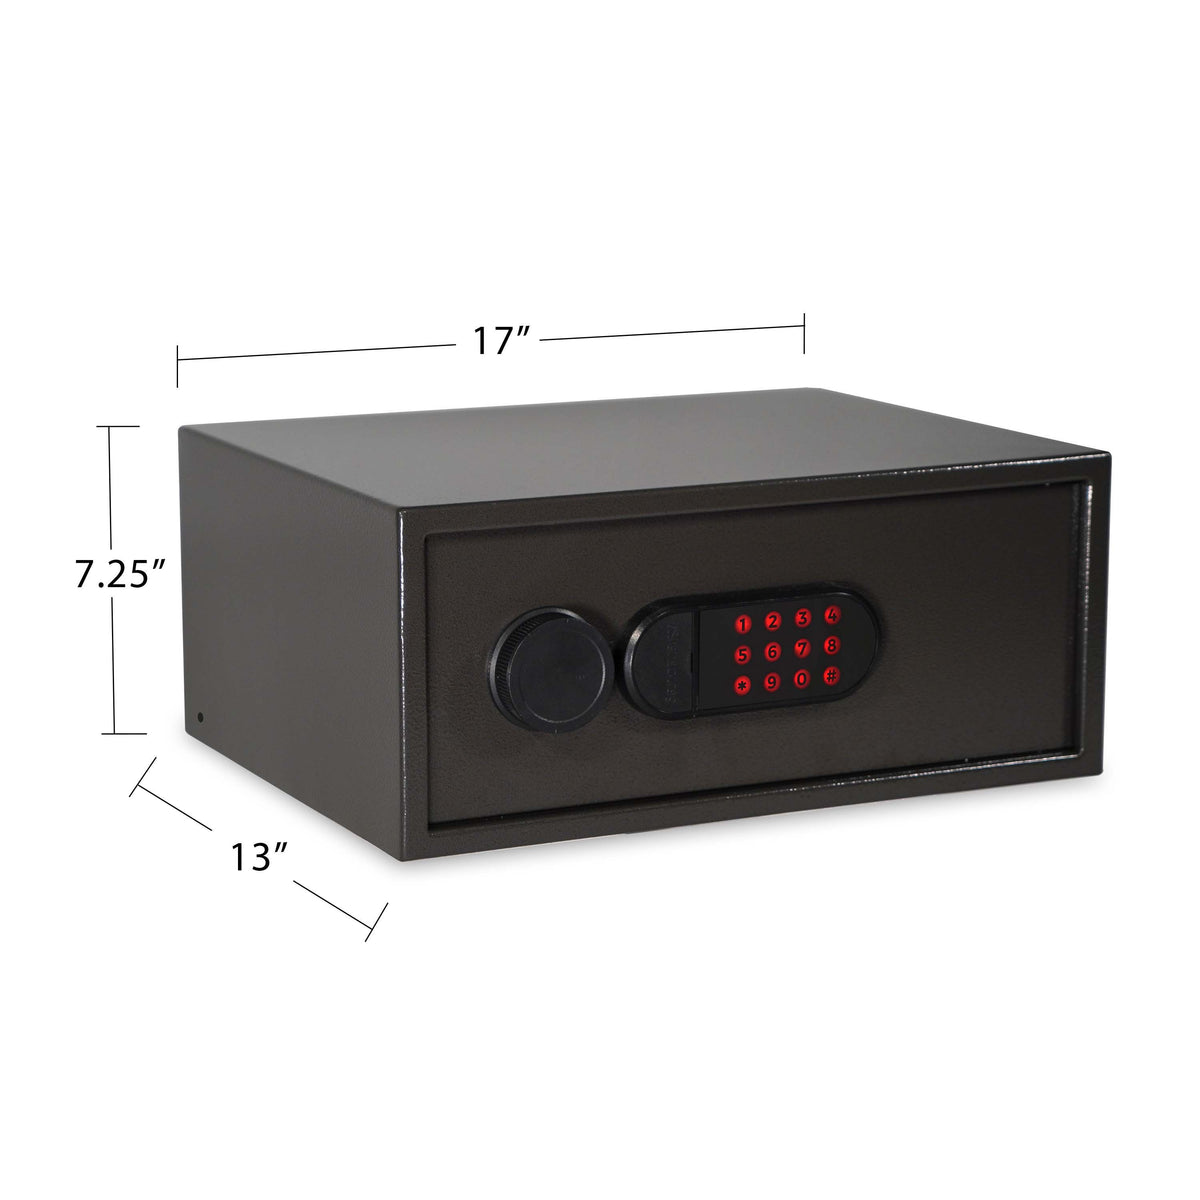 Sports Afield SA-PVLP-01 Home and Office Security Safe Dimensions